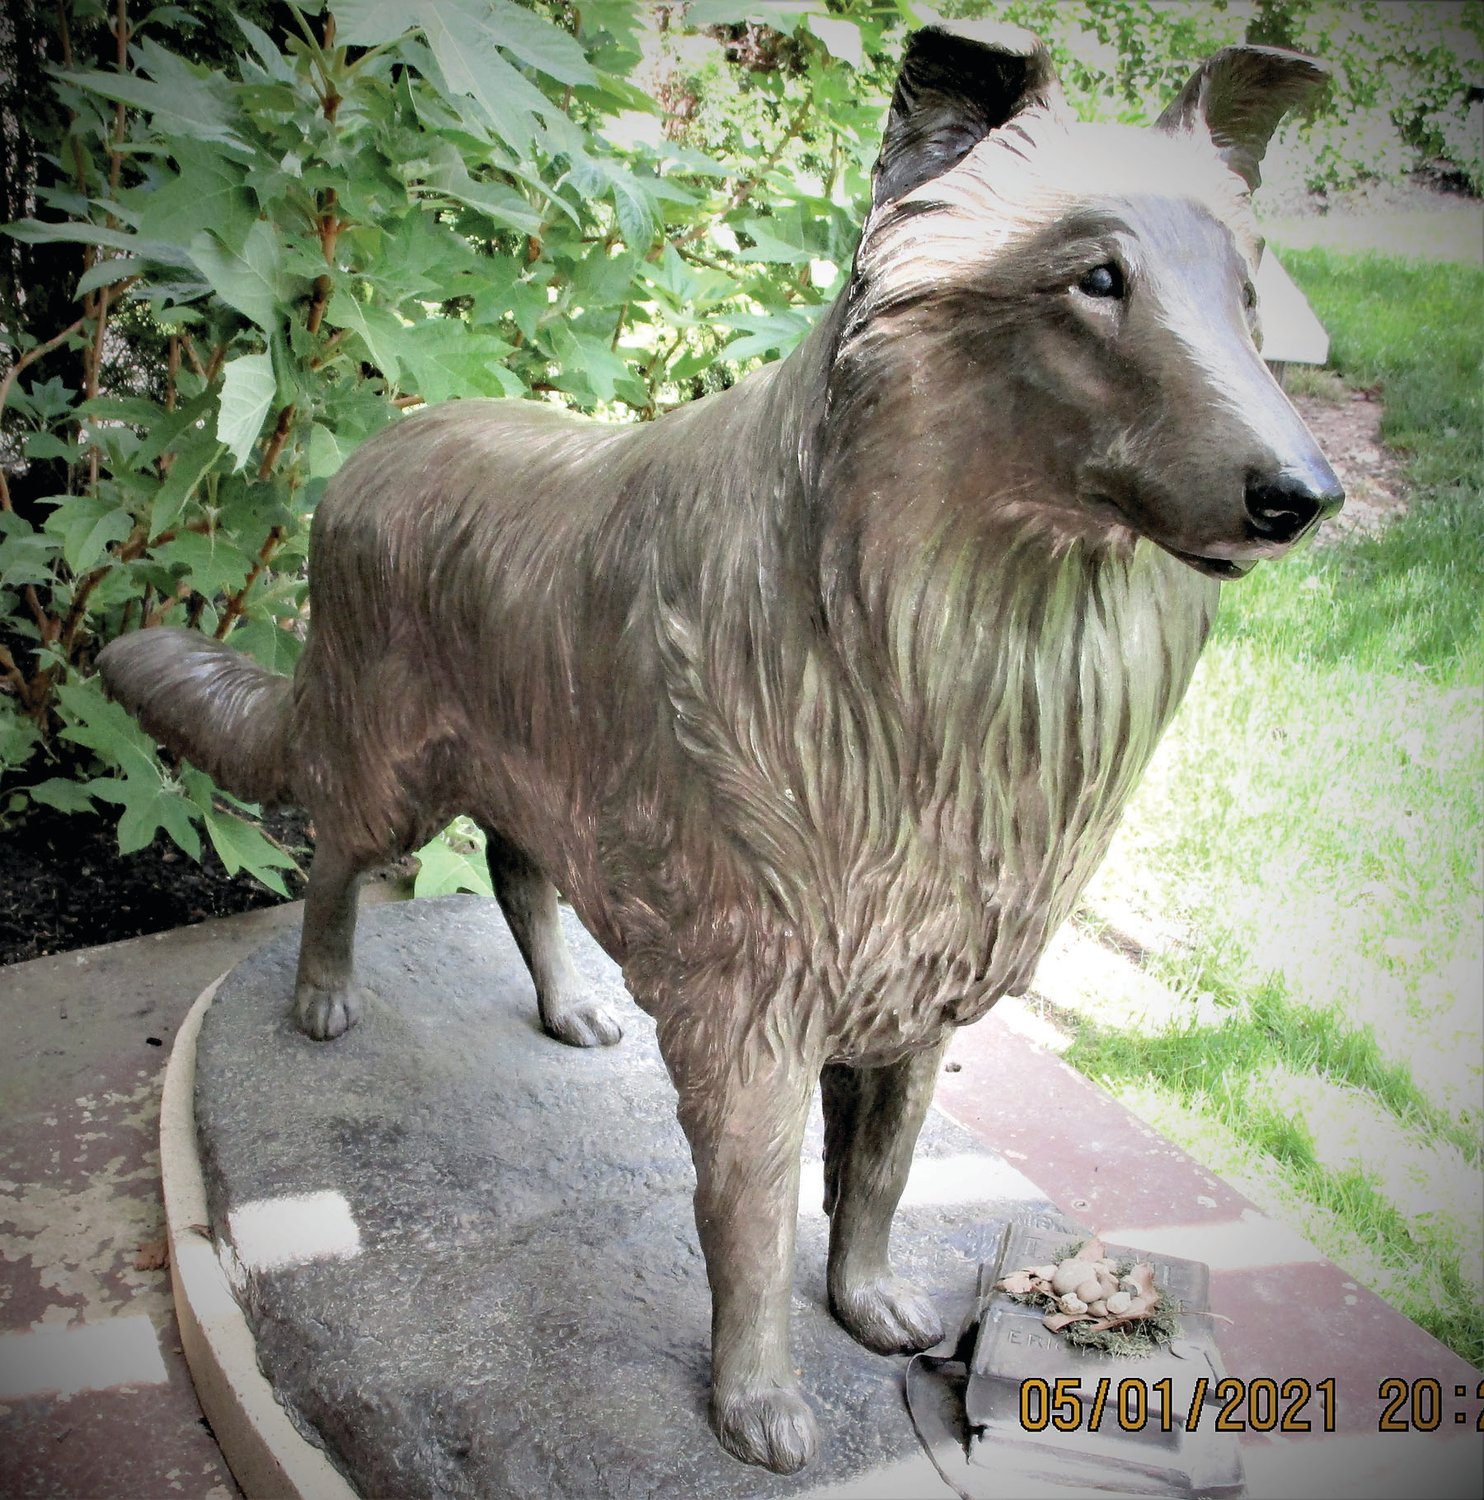 The Lassie sculpture was commissioned by the Michener Art Museum, made possible through a Pennsylvania Legislative Initiative Grant won in 1995.